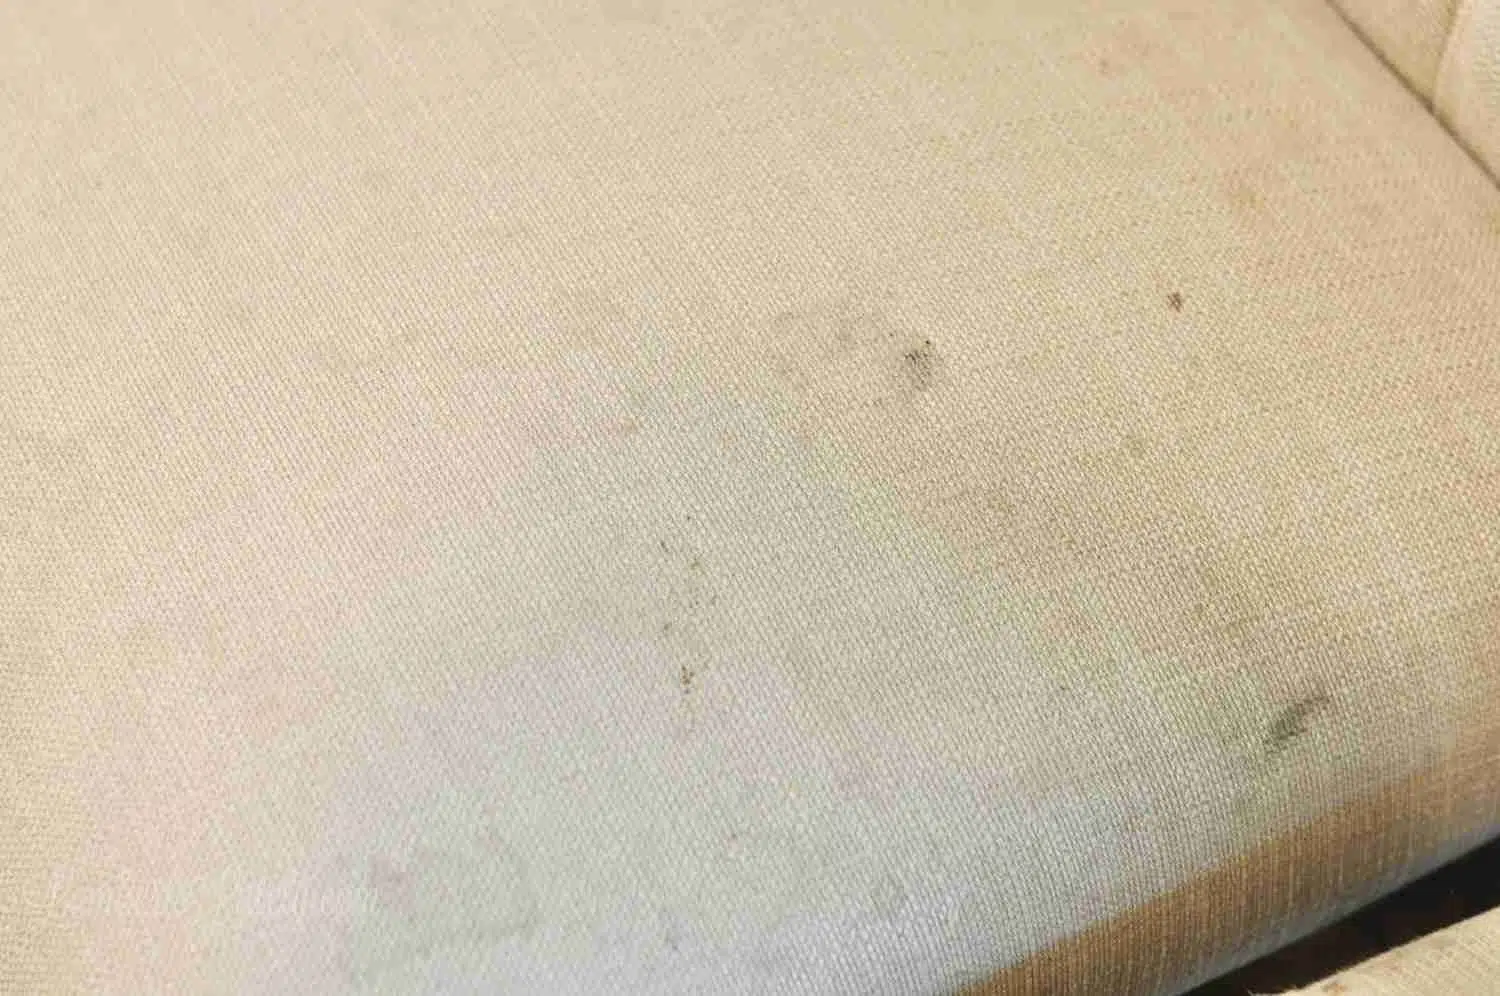 dirty upholstery on a chair